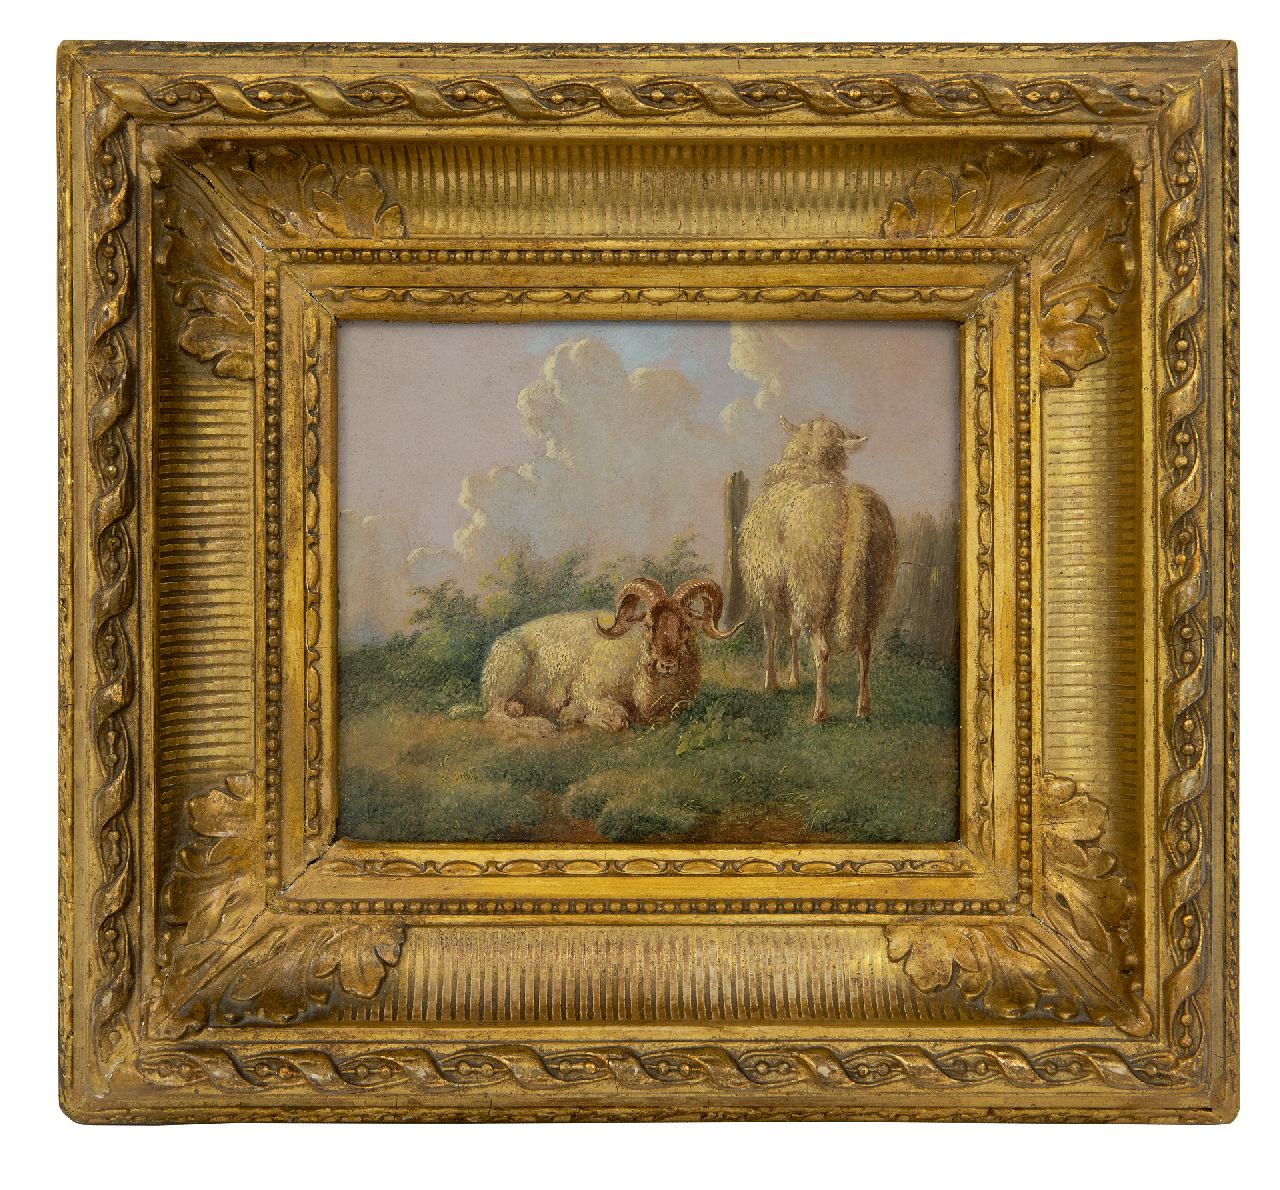 Verhoesen A.  | Albertus Verhoesen | Paintings offered for sale | Sheep on a summary pasture, oil on panel 14.5 x 16.5 cm, signed r.o.t.c. and dated 1845